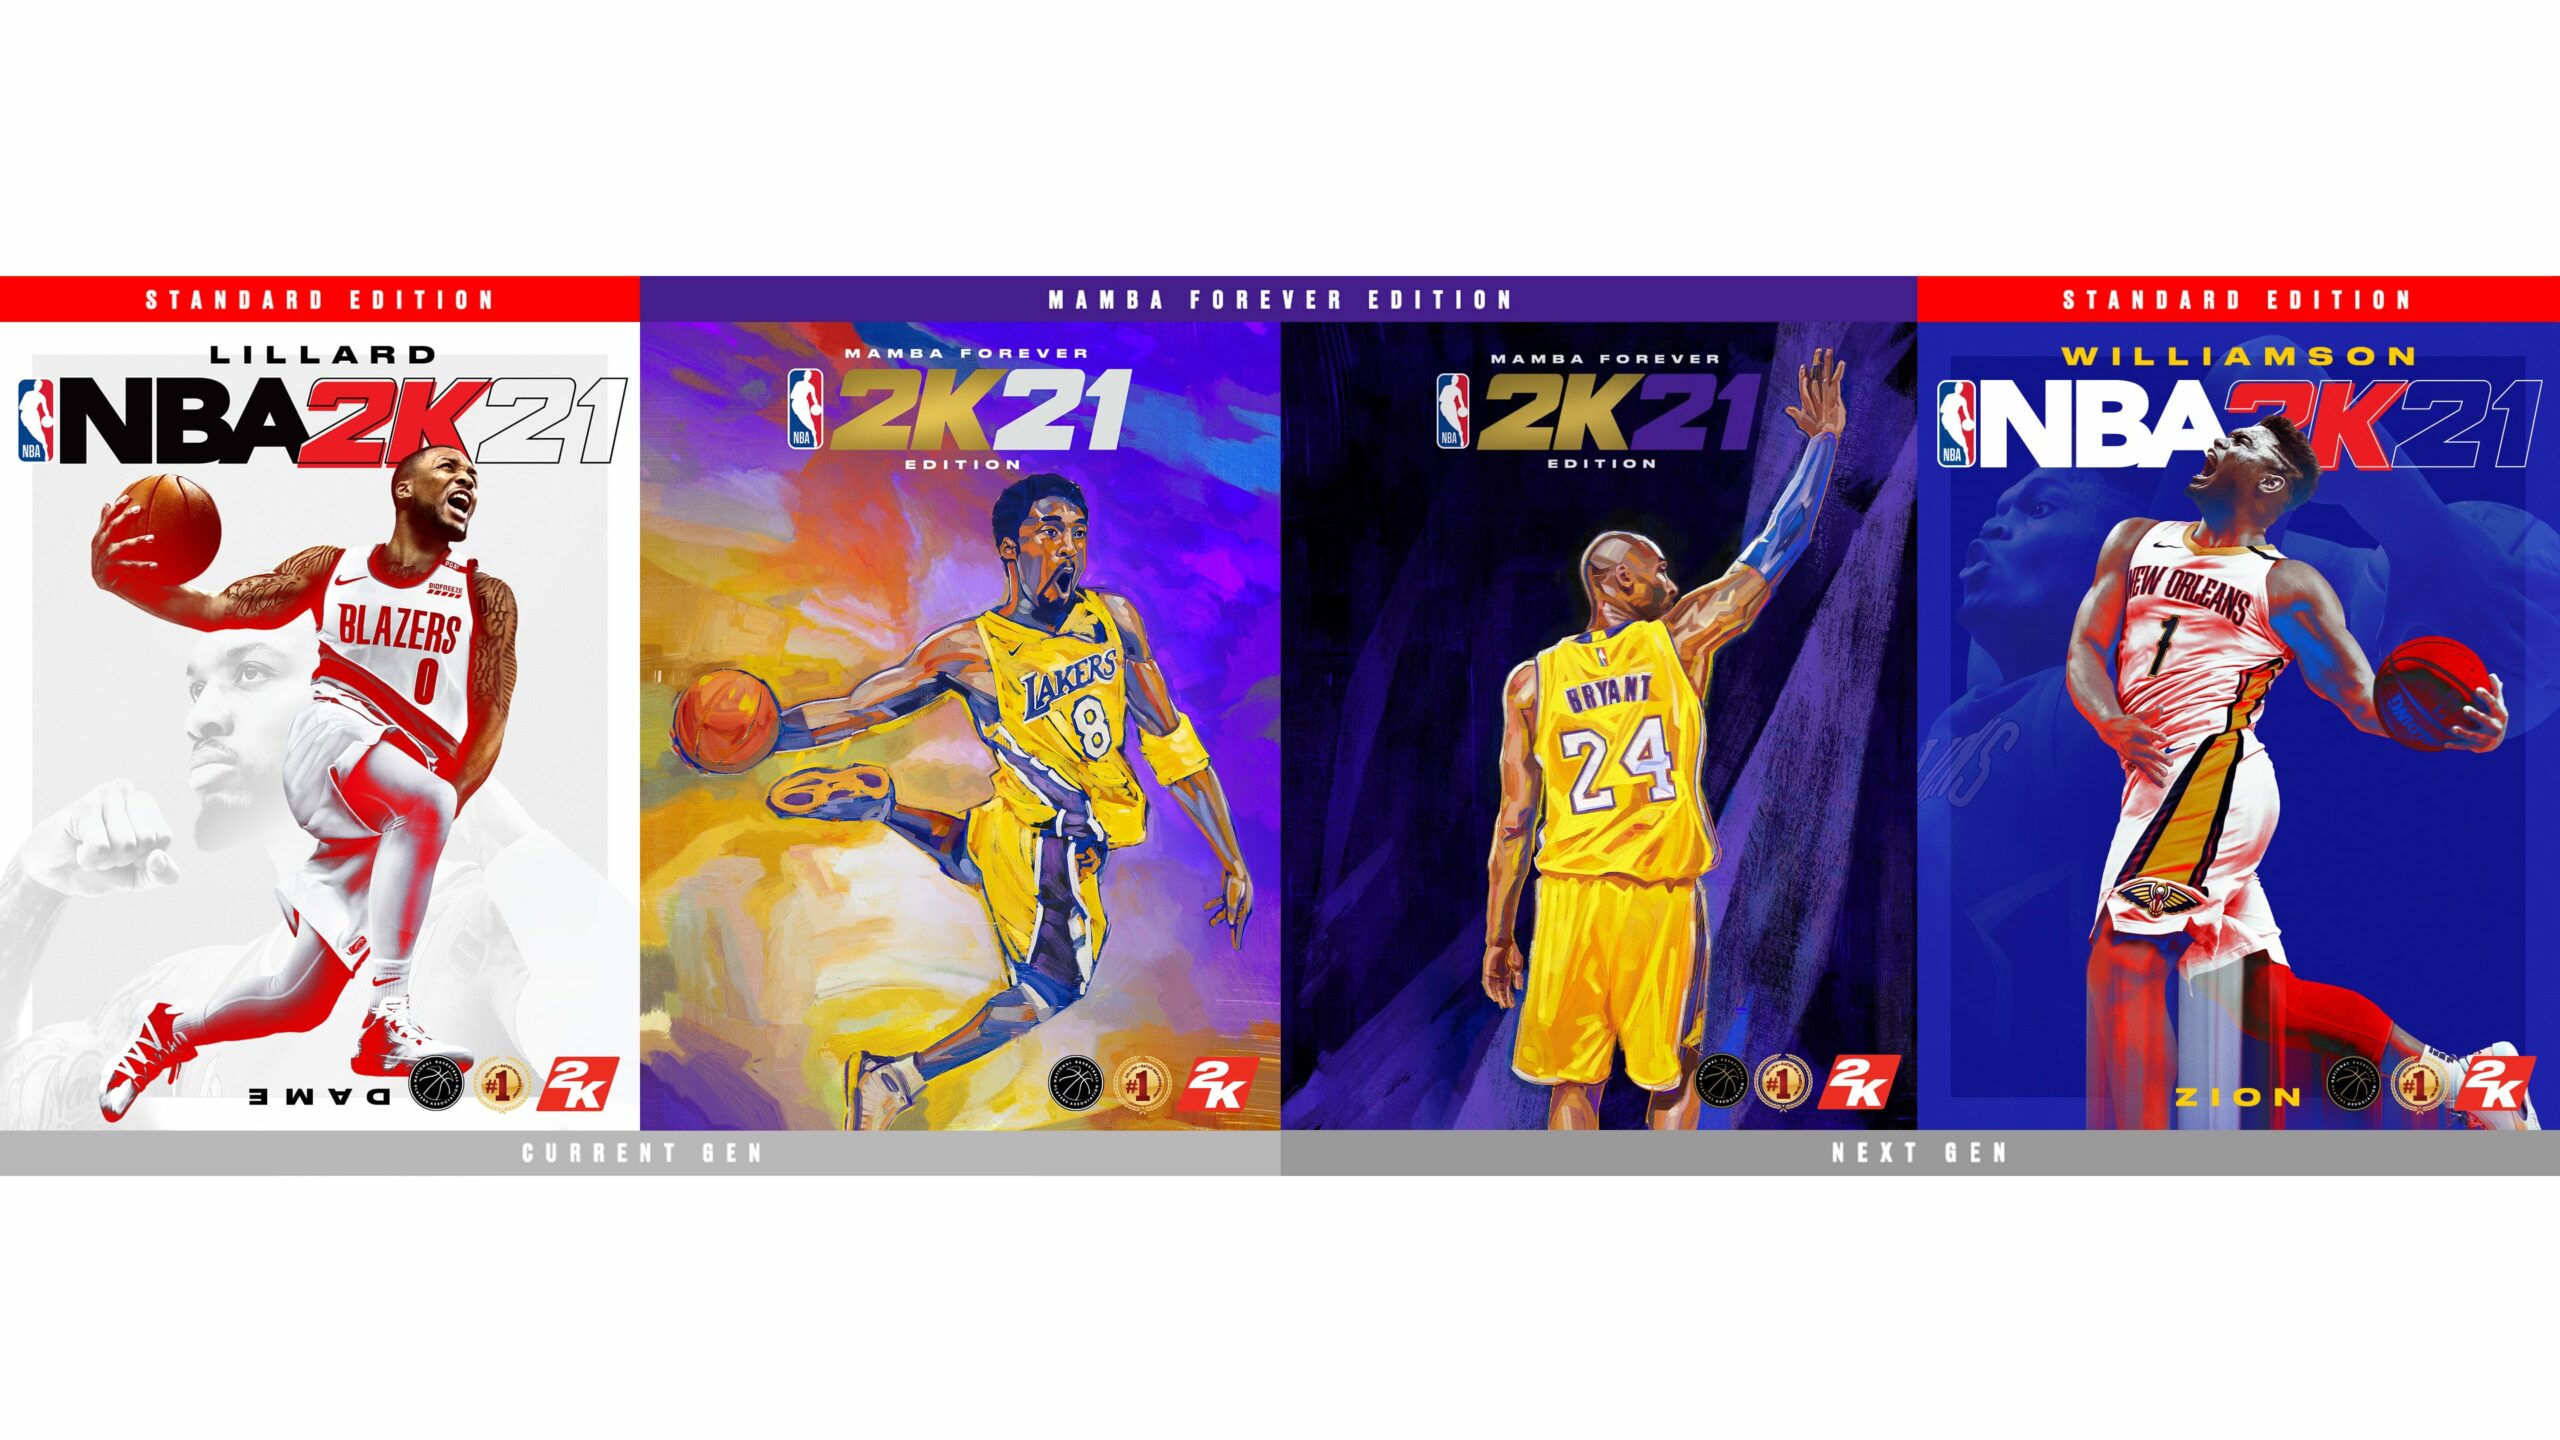 Nba 2k21 Launches September 4 For Ps4 Xbox One Switch And Pc At Launch For Ps5 And Xbox Series X Gematsu